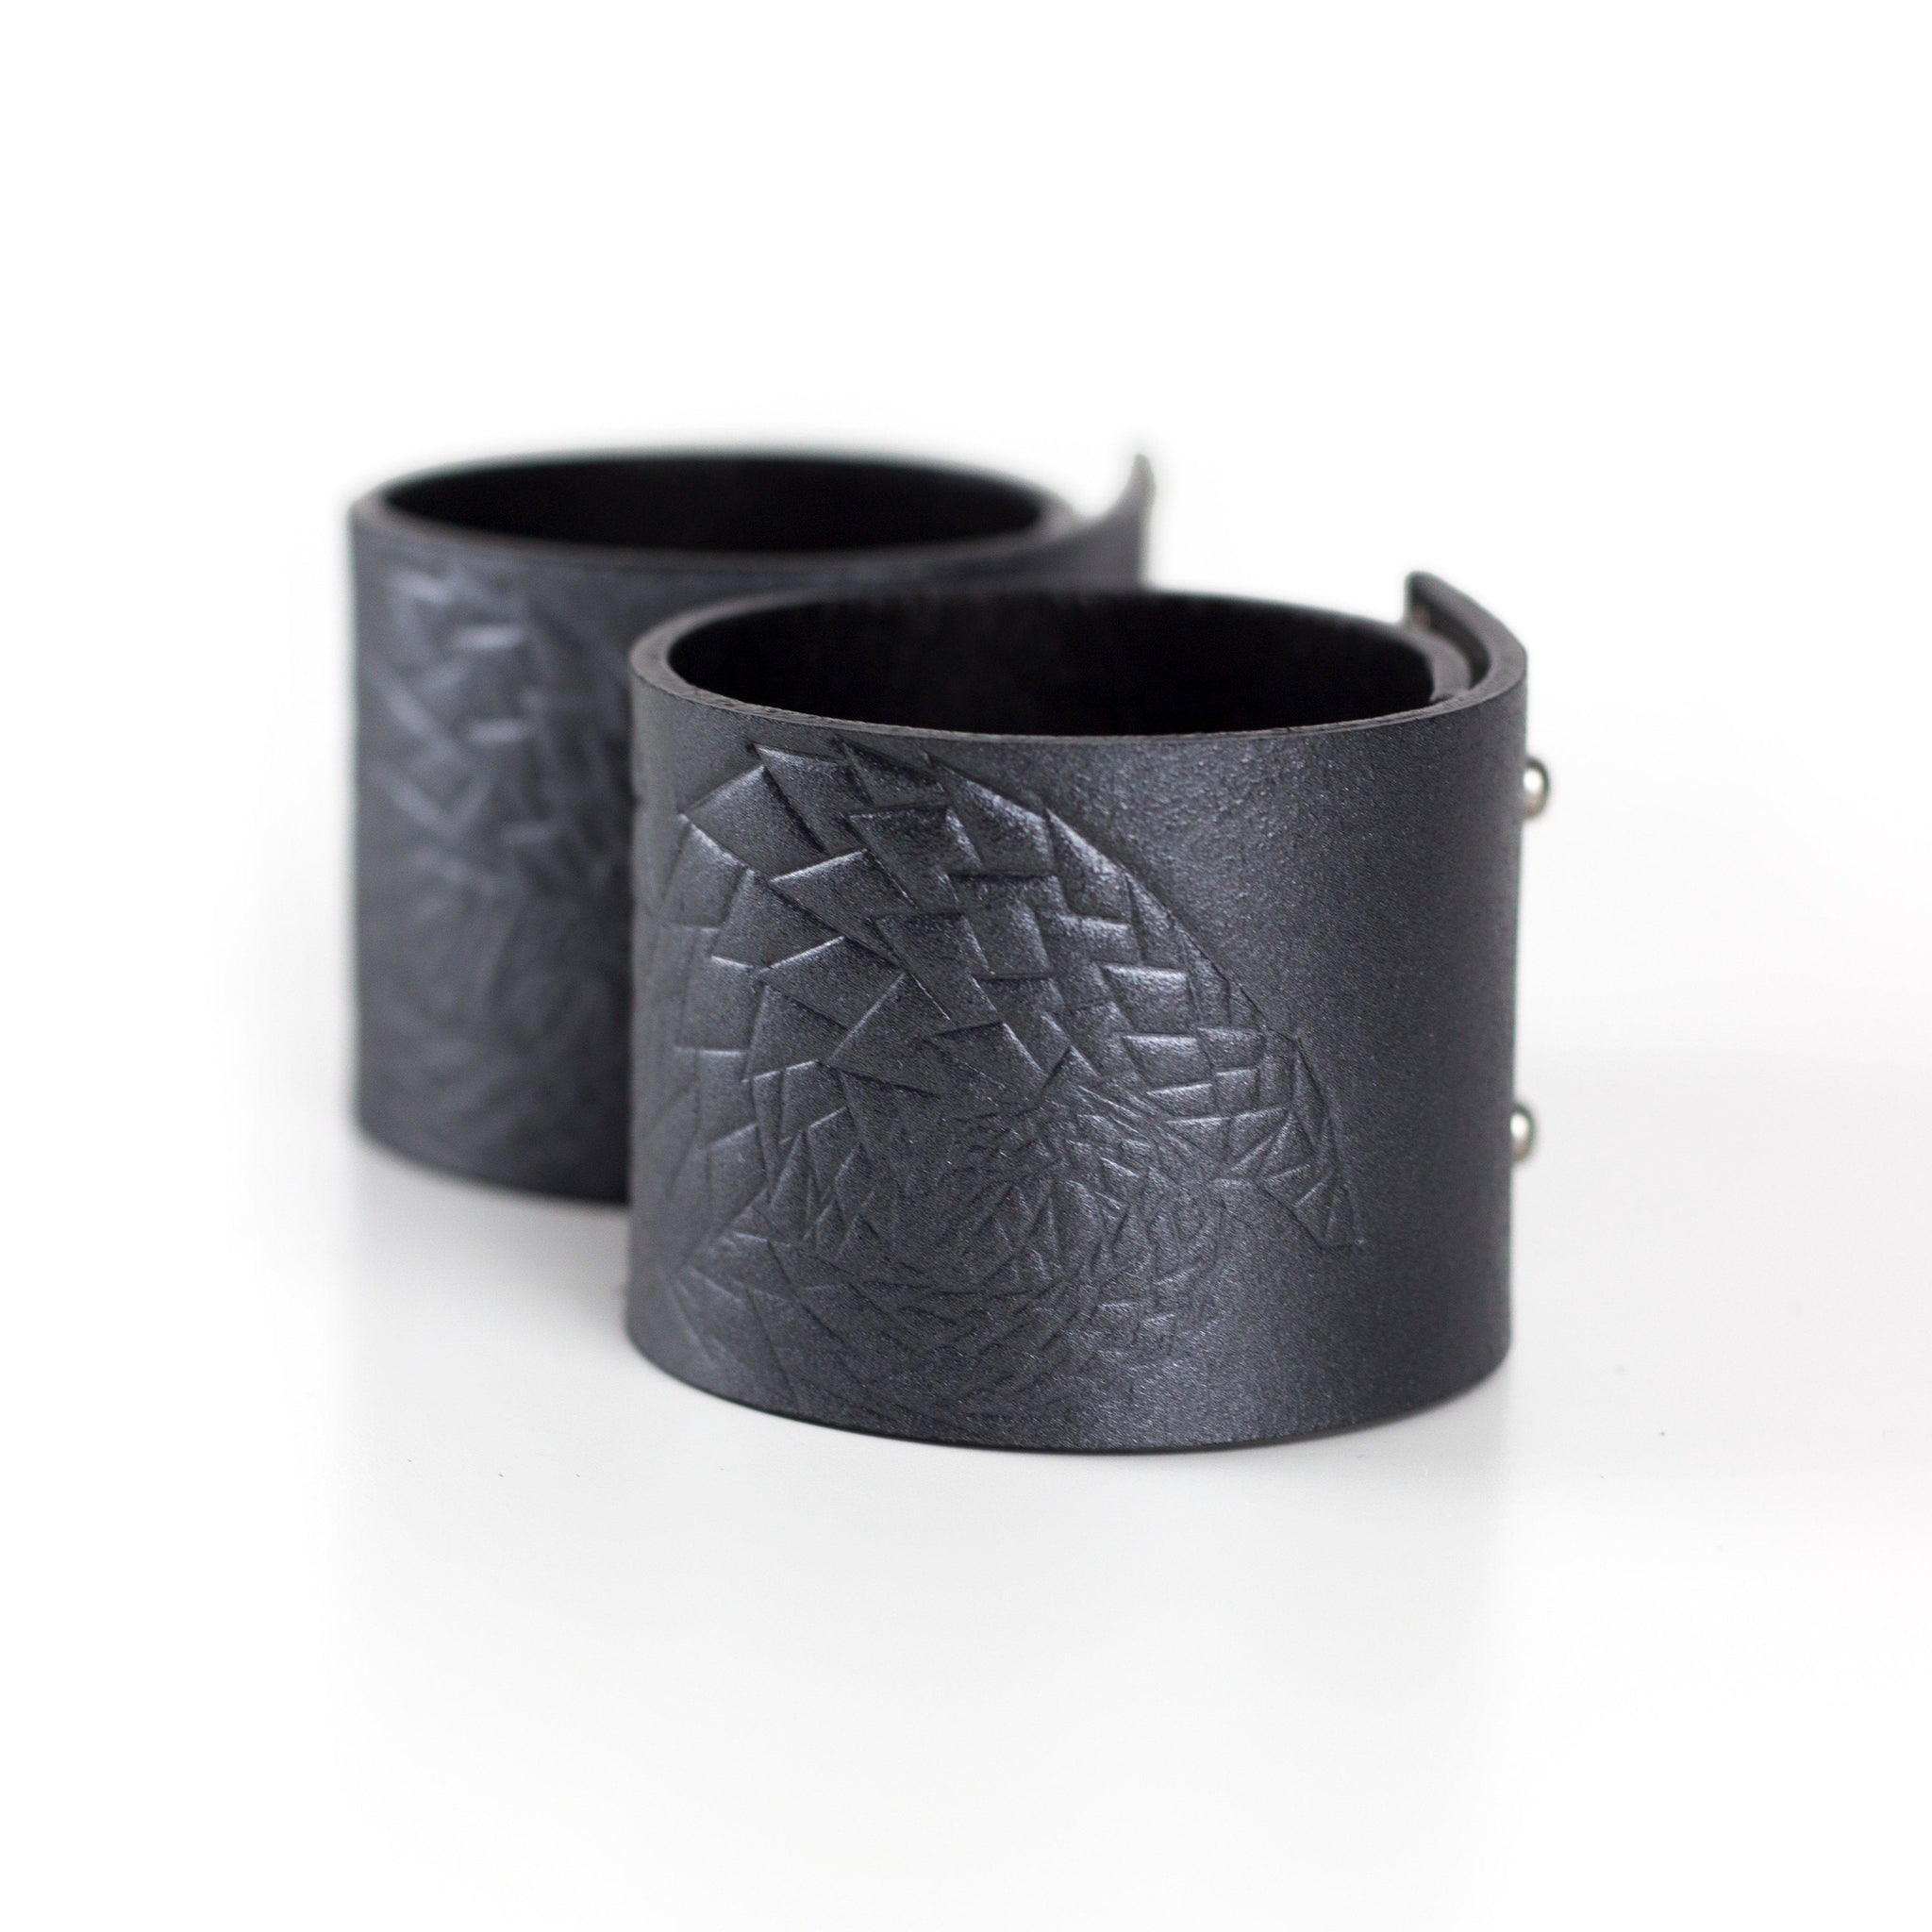 Genuine leather bracelet wide bangles, women's cuff with pangolin pattern-antracit, bangles, black leather, Bracelet, cuff, dark silver, designer bracelet, designer jewelry, emboss, embossed, geometric, hand_painted, handmade, Jewelry, leather bracelet, leather jewelry, metallic, minimal, minimalist, pangolin, recycled, shiny, silver, studded, with studs, zerowaste-Mimikri